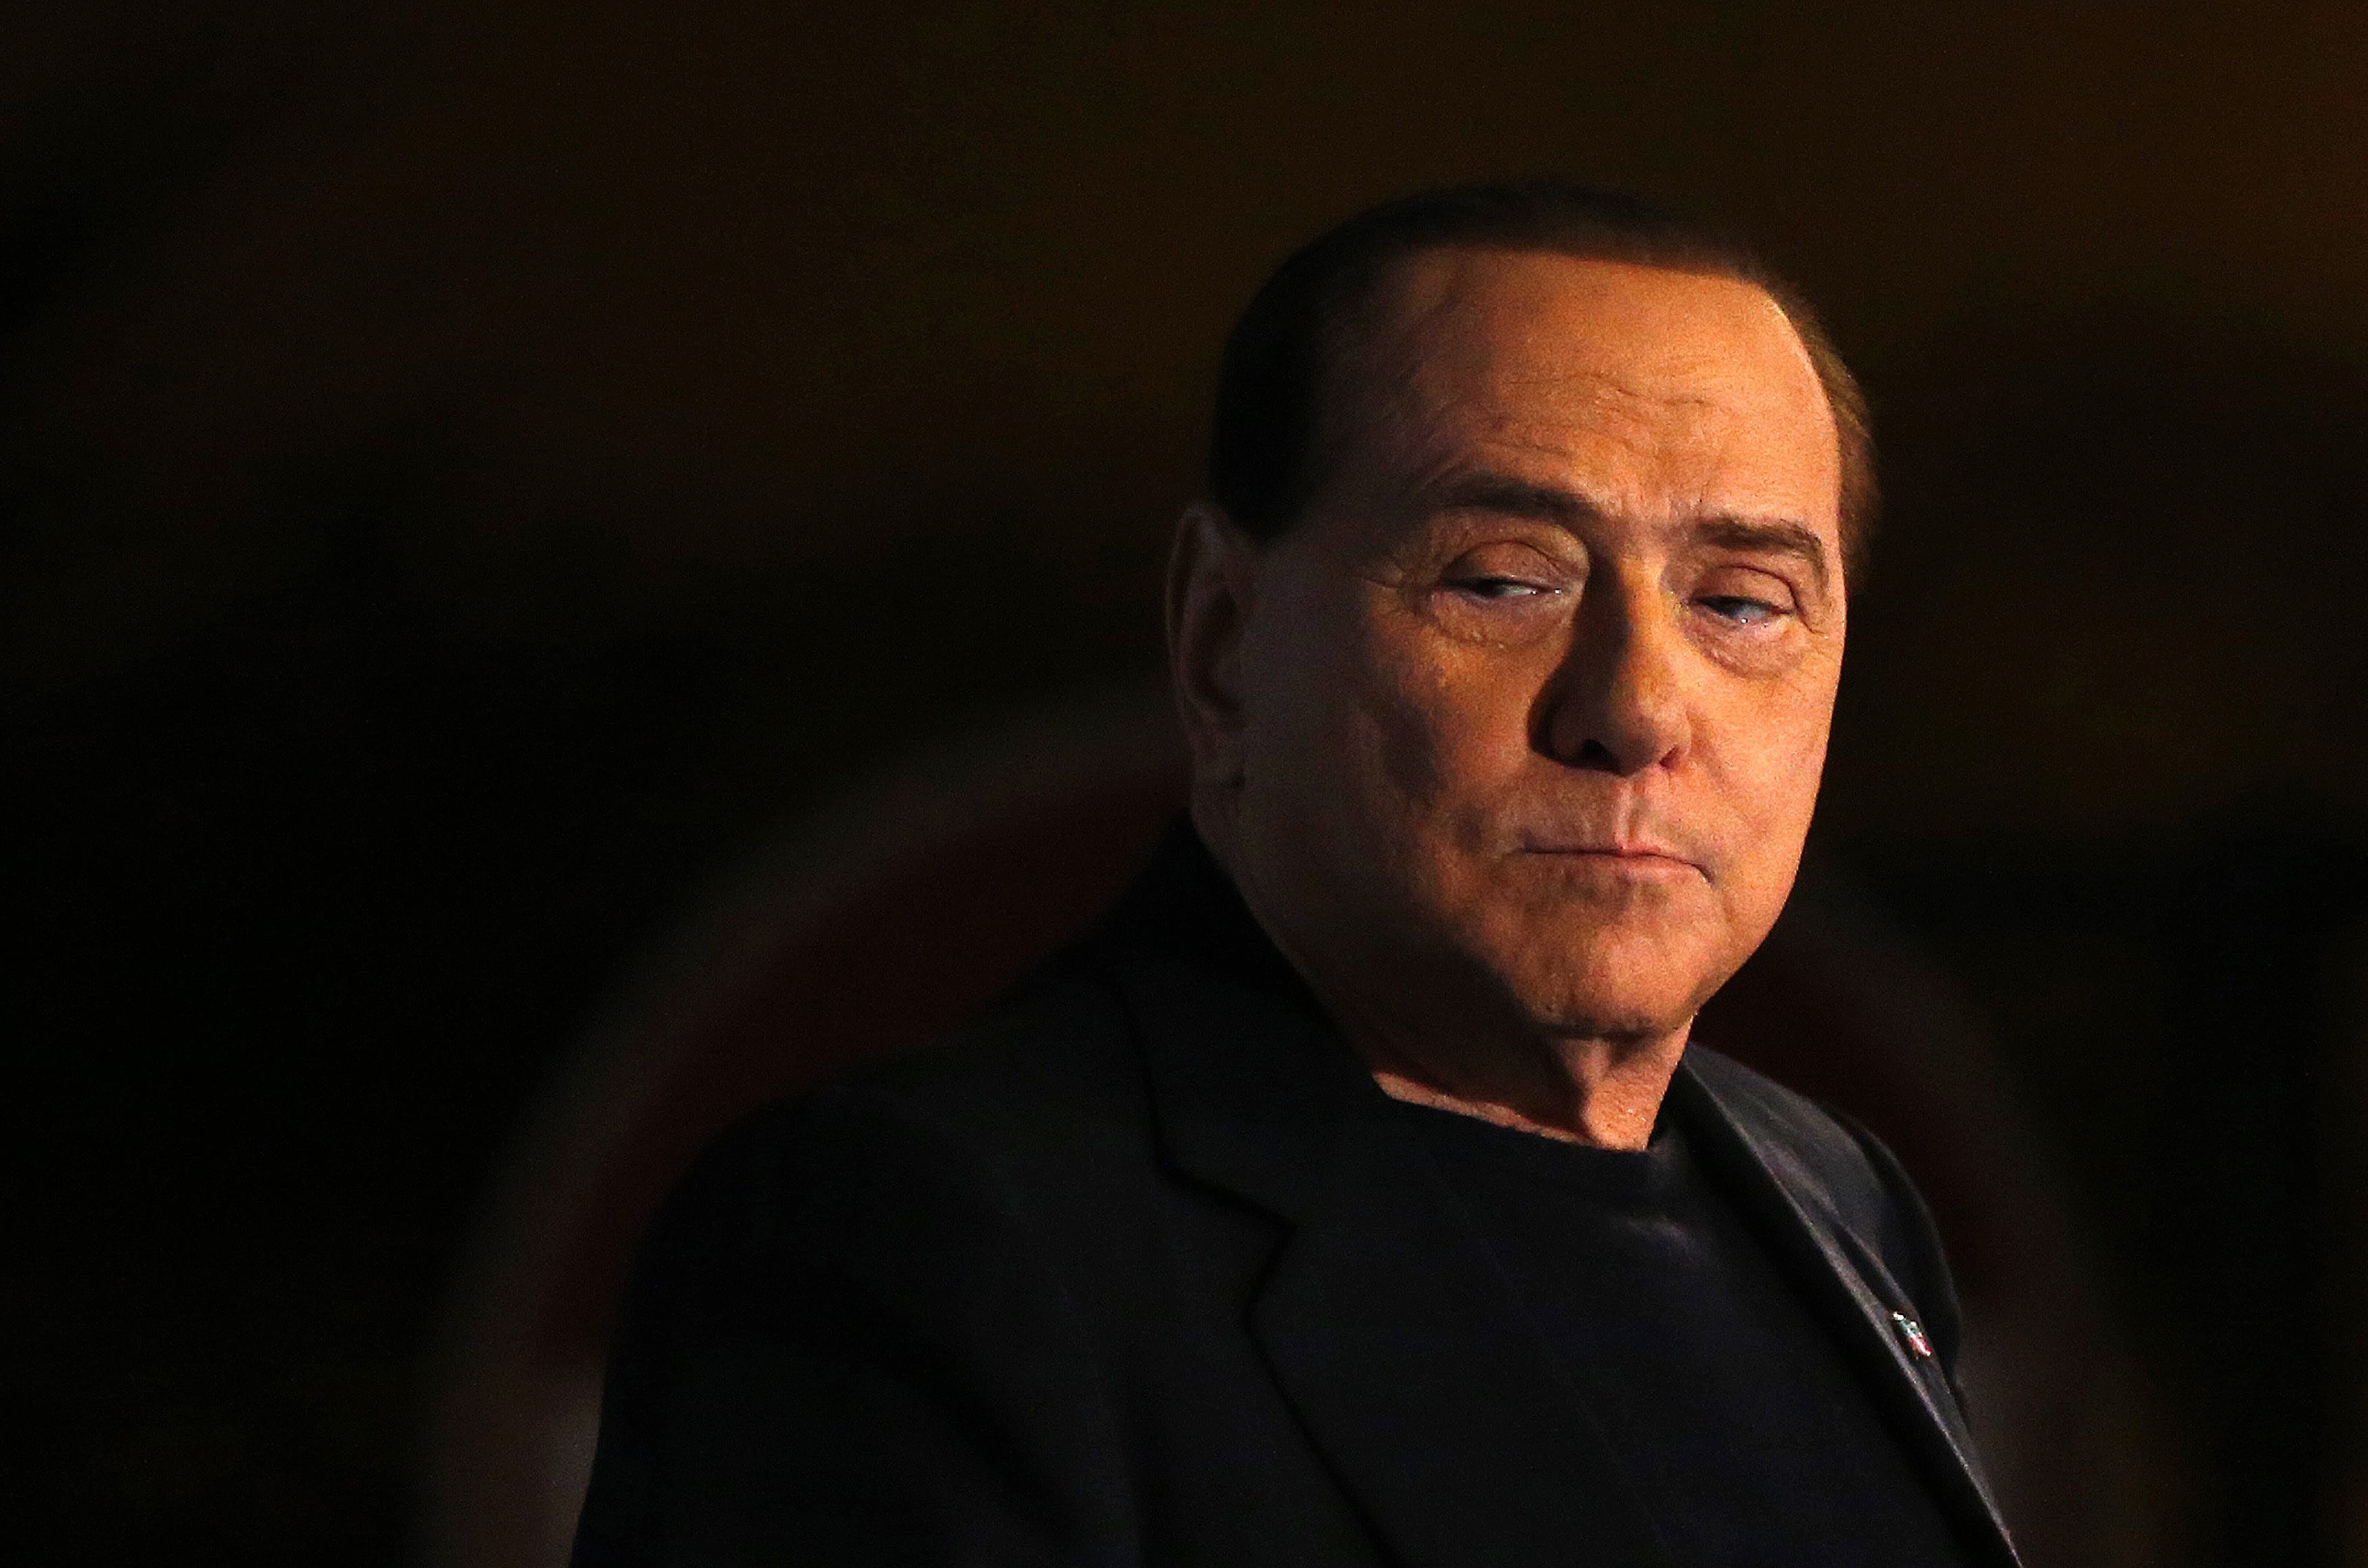 Berlusconi back in court for bribery in new trial